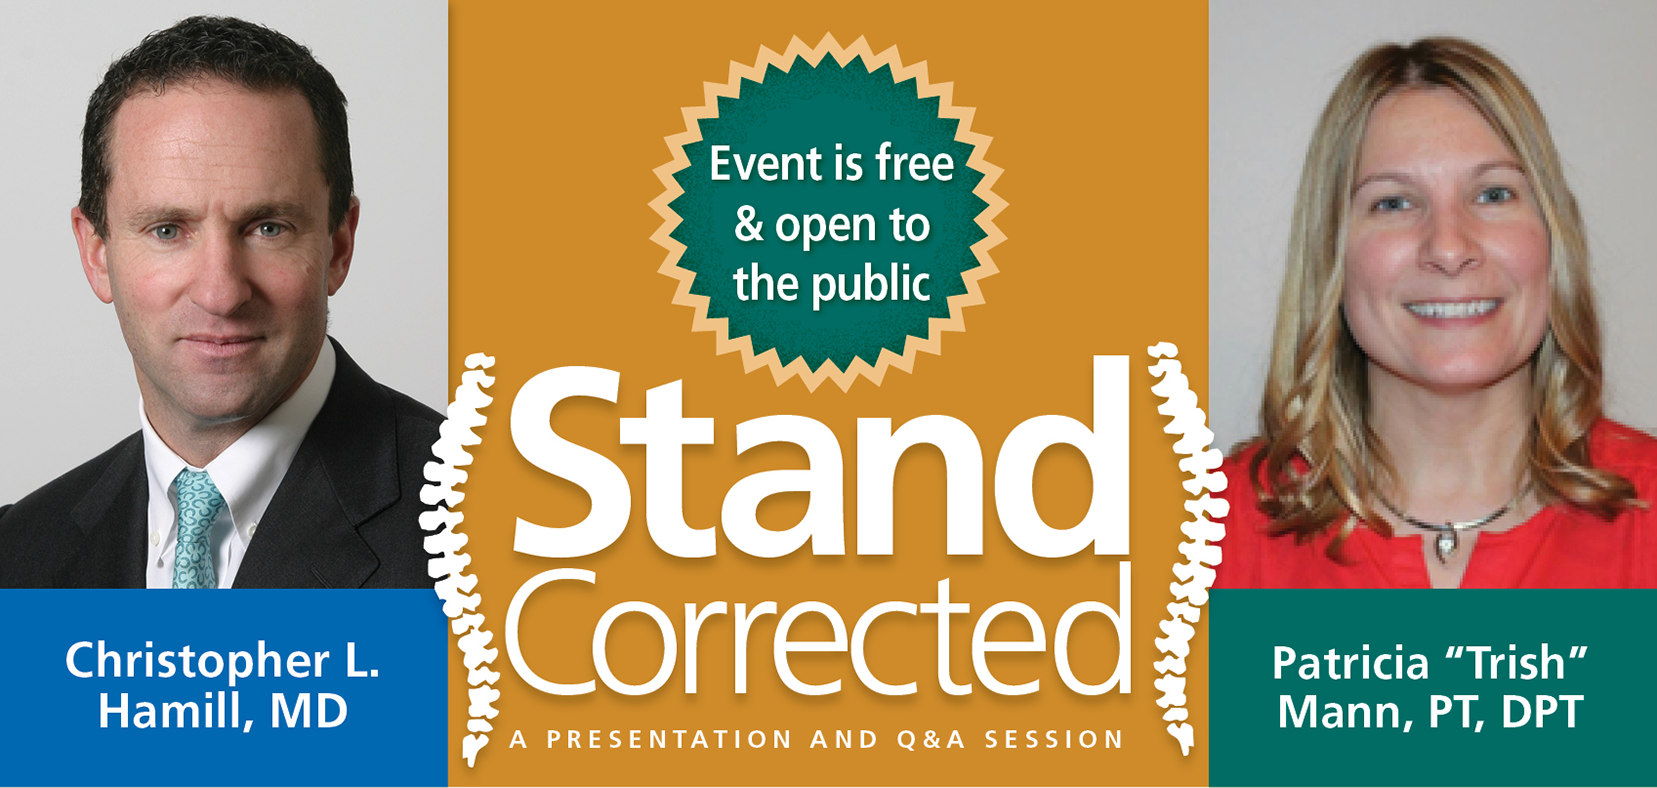 GreenFields Continuing Care Community to Host “Stand Corrected” Event on Lower Back Pain & Treatment Options